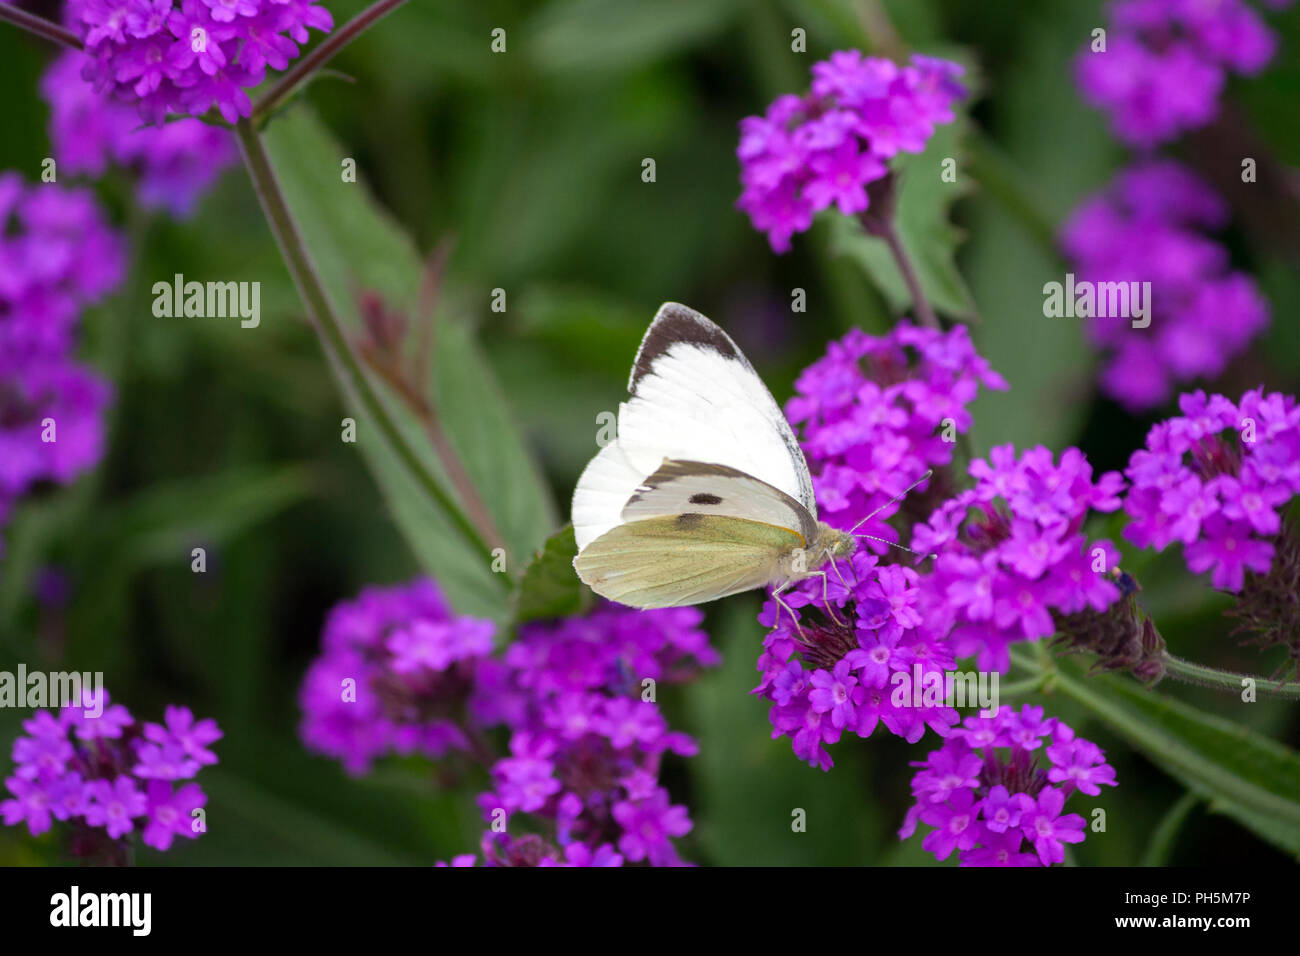 Pieris brassicae, white big butterfly close-up sits on a plant Verbena rigida,slender vervain,tuberous vervain,  lilac bright flower on a background Stock Photo